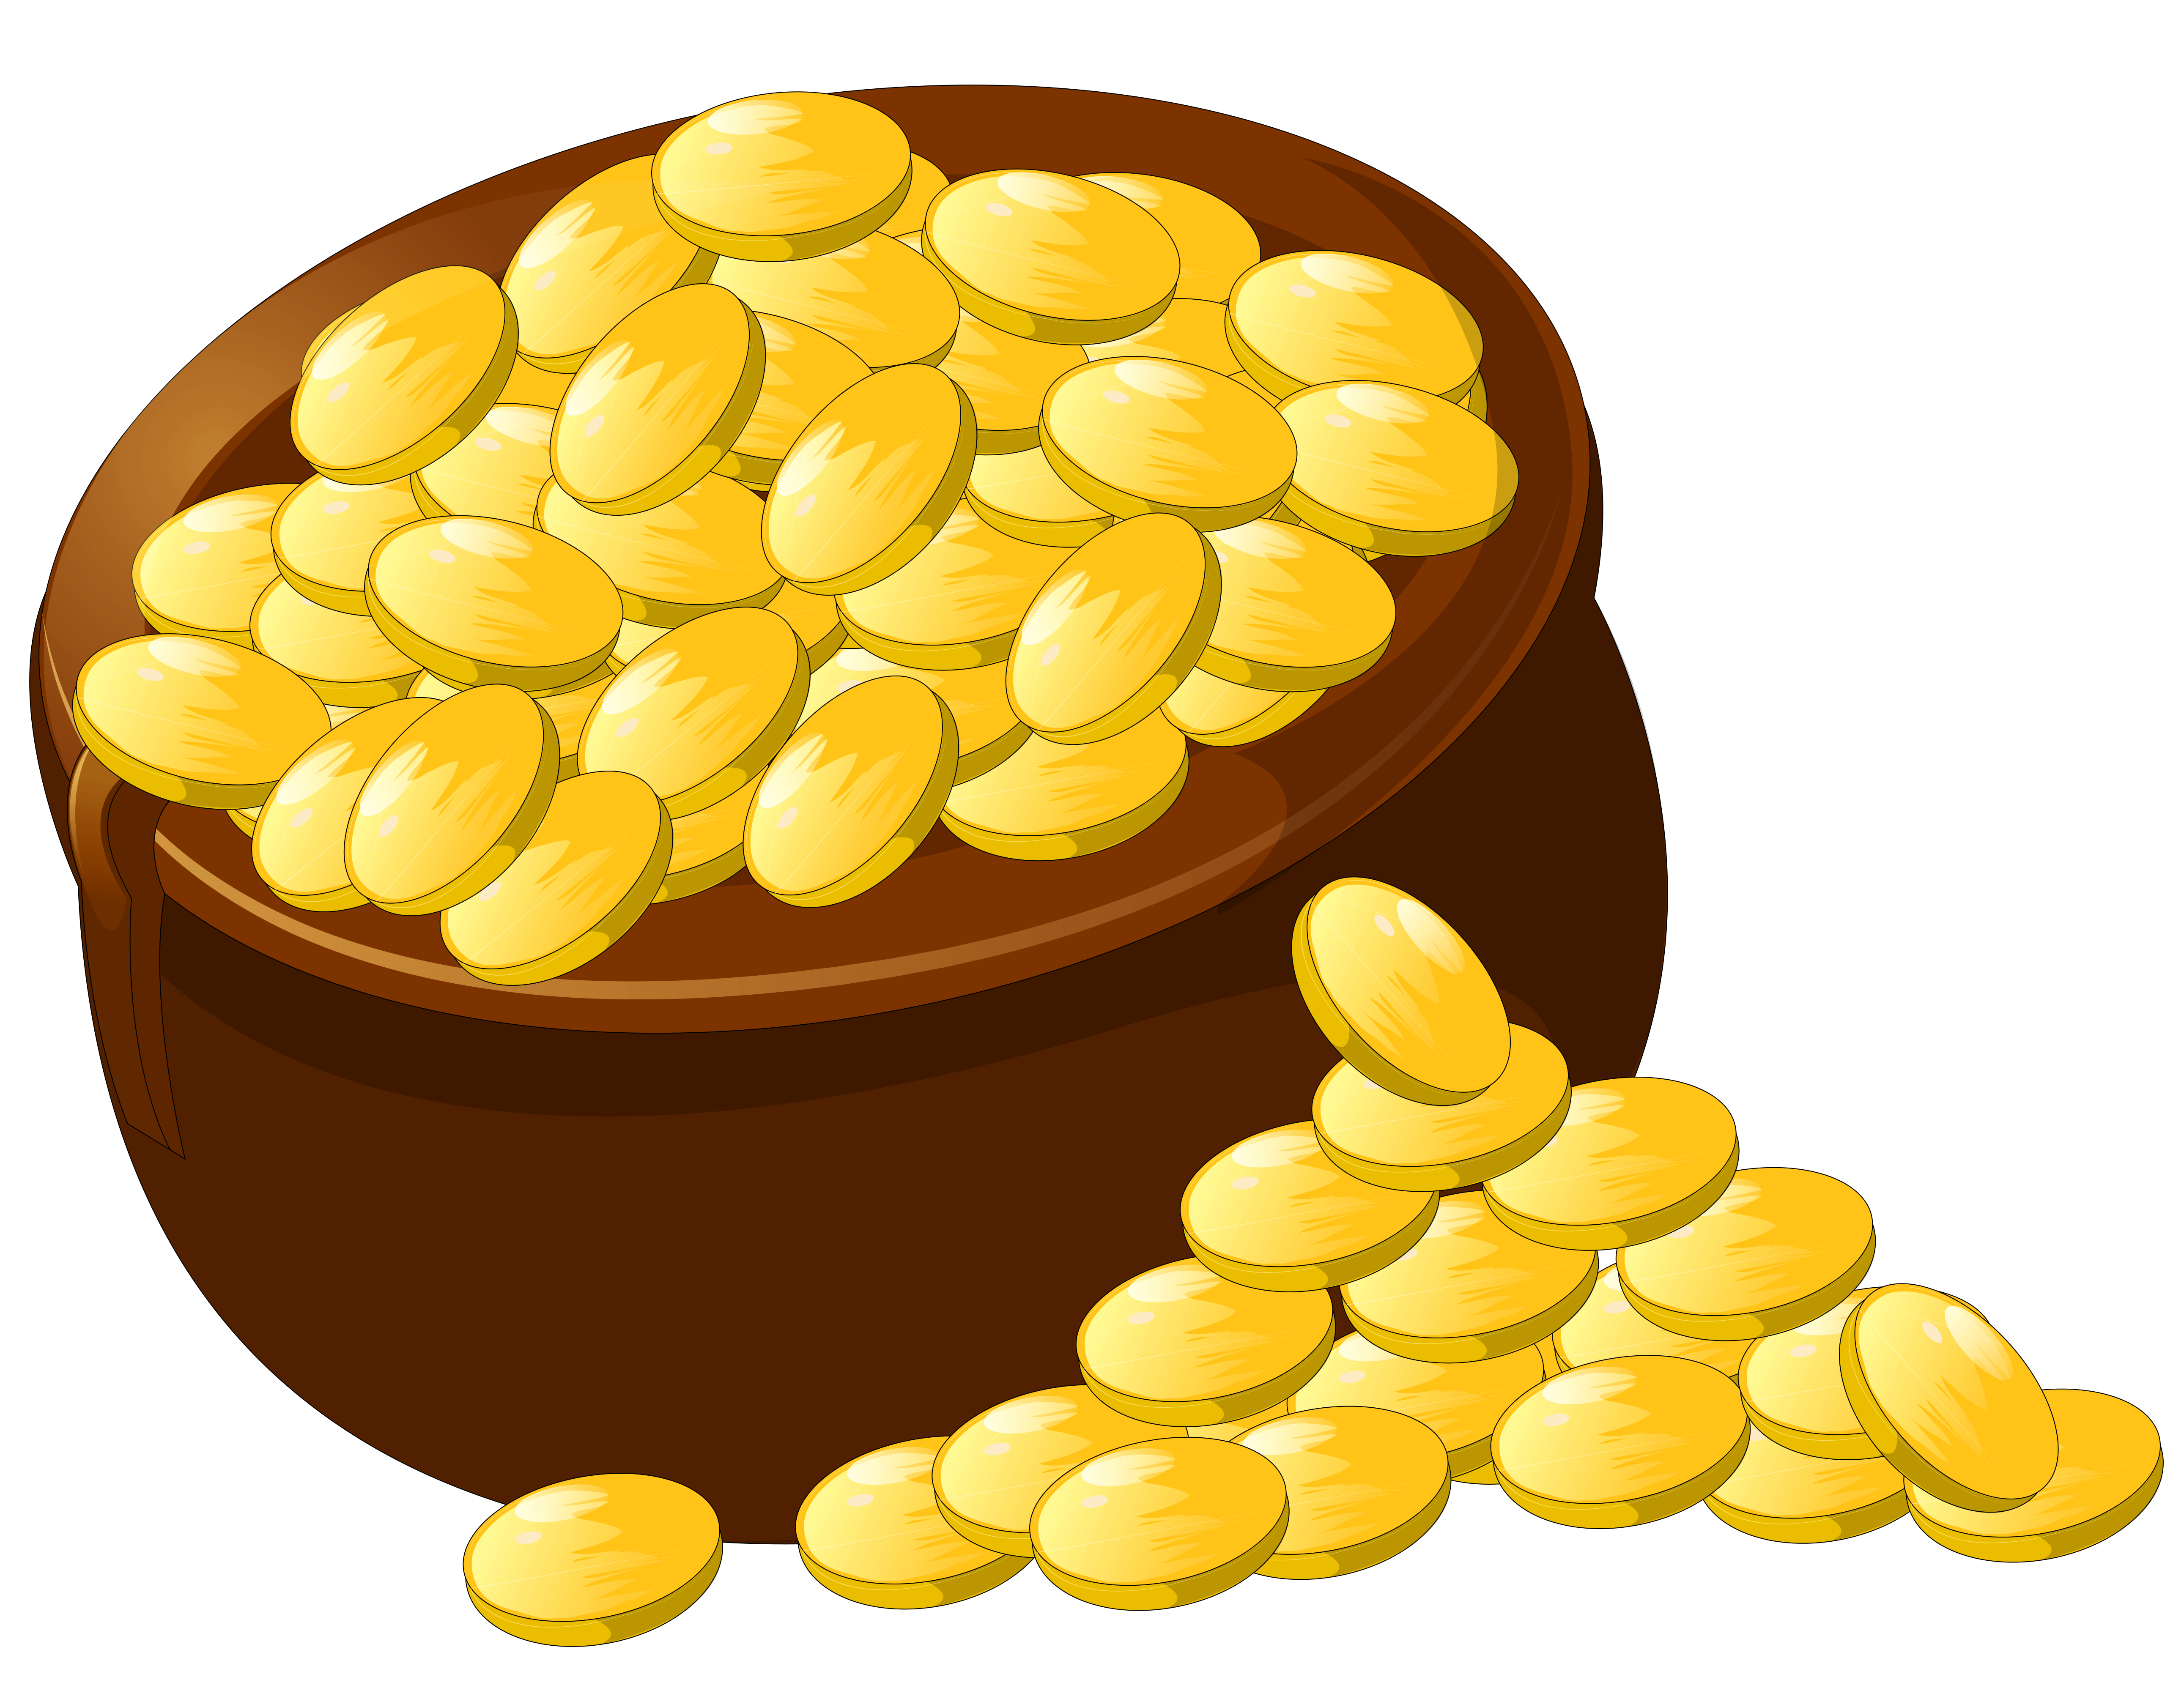 Bar Gold Commodity Food Vegetarian Coin PNG Image